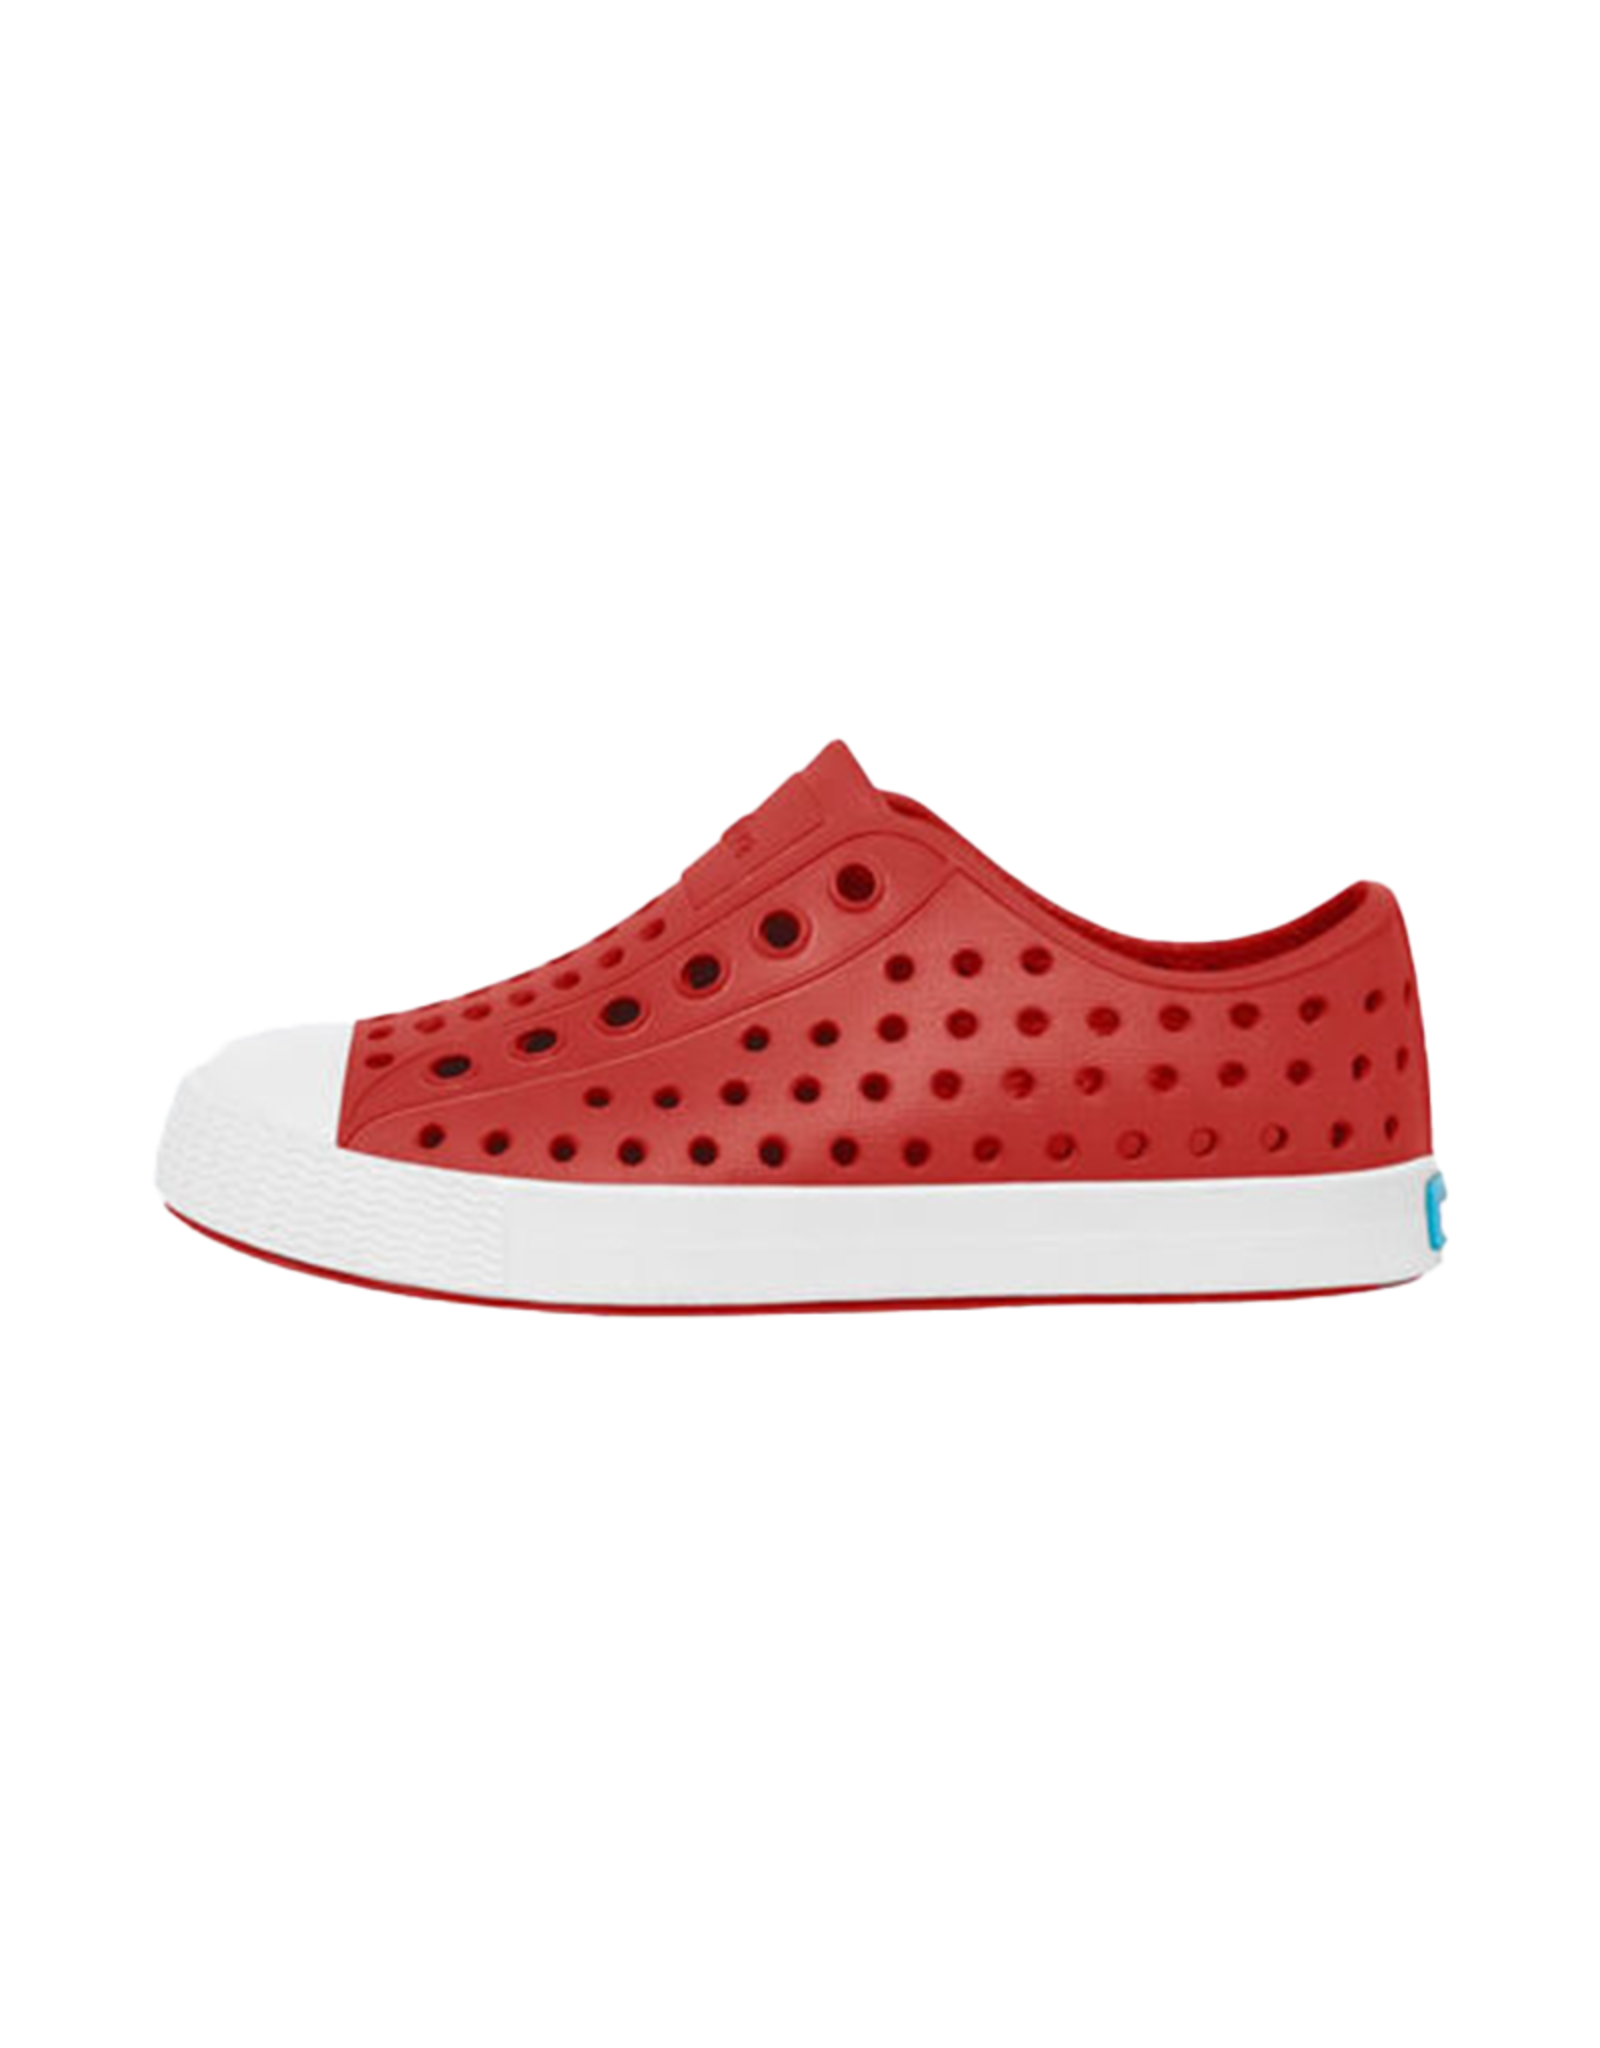 Natives Jefferson Torch Red